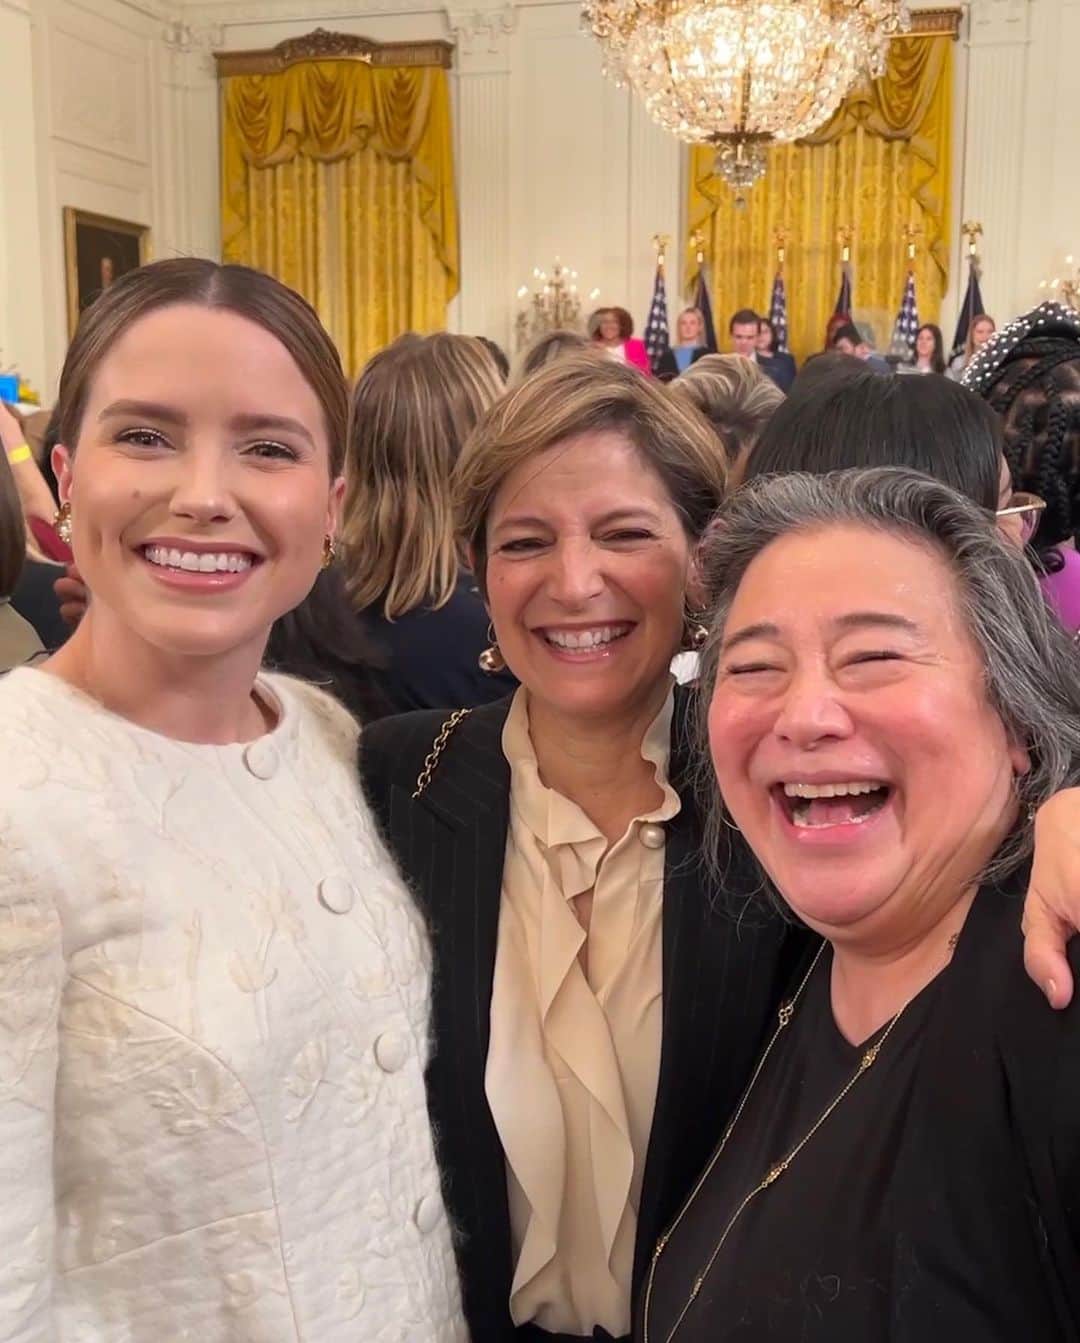 ソフィア・ブッシュさんのインスタグラム写真 - (ソフィア・ブッシュInstagram)「It was an honor to be at the White House for the President and First Lady’s Celebration of Women’s History Month this week. To watch @potus, @flotus, @vp, and @secondgentleman speak before us.  To be surrounded by the women leading our government. @speakerpelosi and so many more who fight for us in the House. To be included in a group of change makers, barrier breakers, and leaders from so many industries. @adrienneelrod from our nation’s CHIPS program. The @ObamaFoundation’s @tinatchen. @themeteor’s @cindi_leive. @glamourmag’s @tashpearlman. Journalists. Astronauts. Activists like @charlotte.clymer. @maya4civilrights, president of @civilrightsorg. The powerhouse ladies of @theskimm and @votemamalobby. Sali of @argent. #GirlsWhoCode’s @reshmasaujani. Friends like @douglasemhoff, @meena, @opalvadhan, and so many administration staffers. And the incredible students doing big things in Washington, who were invited to the stage with our President and Vice President. My incredibly inspiring pal @k_jeanpierre! And I got to wear my dear friend and phenomal woman @moniquelhuillier 🤍  WHM may span four weeks, but women must be central in both policy and decision making year round. Women matter. Families matter. Paid leave matters. Maternal mortality matters. The way we invest in uplifting families matters. When we uplift women we uplift the world. Let’s go. #WomensHistoryMonth #WHM #TheWhiteHouse #WashingtonDC」3月27日 4時01分 - sophiabush